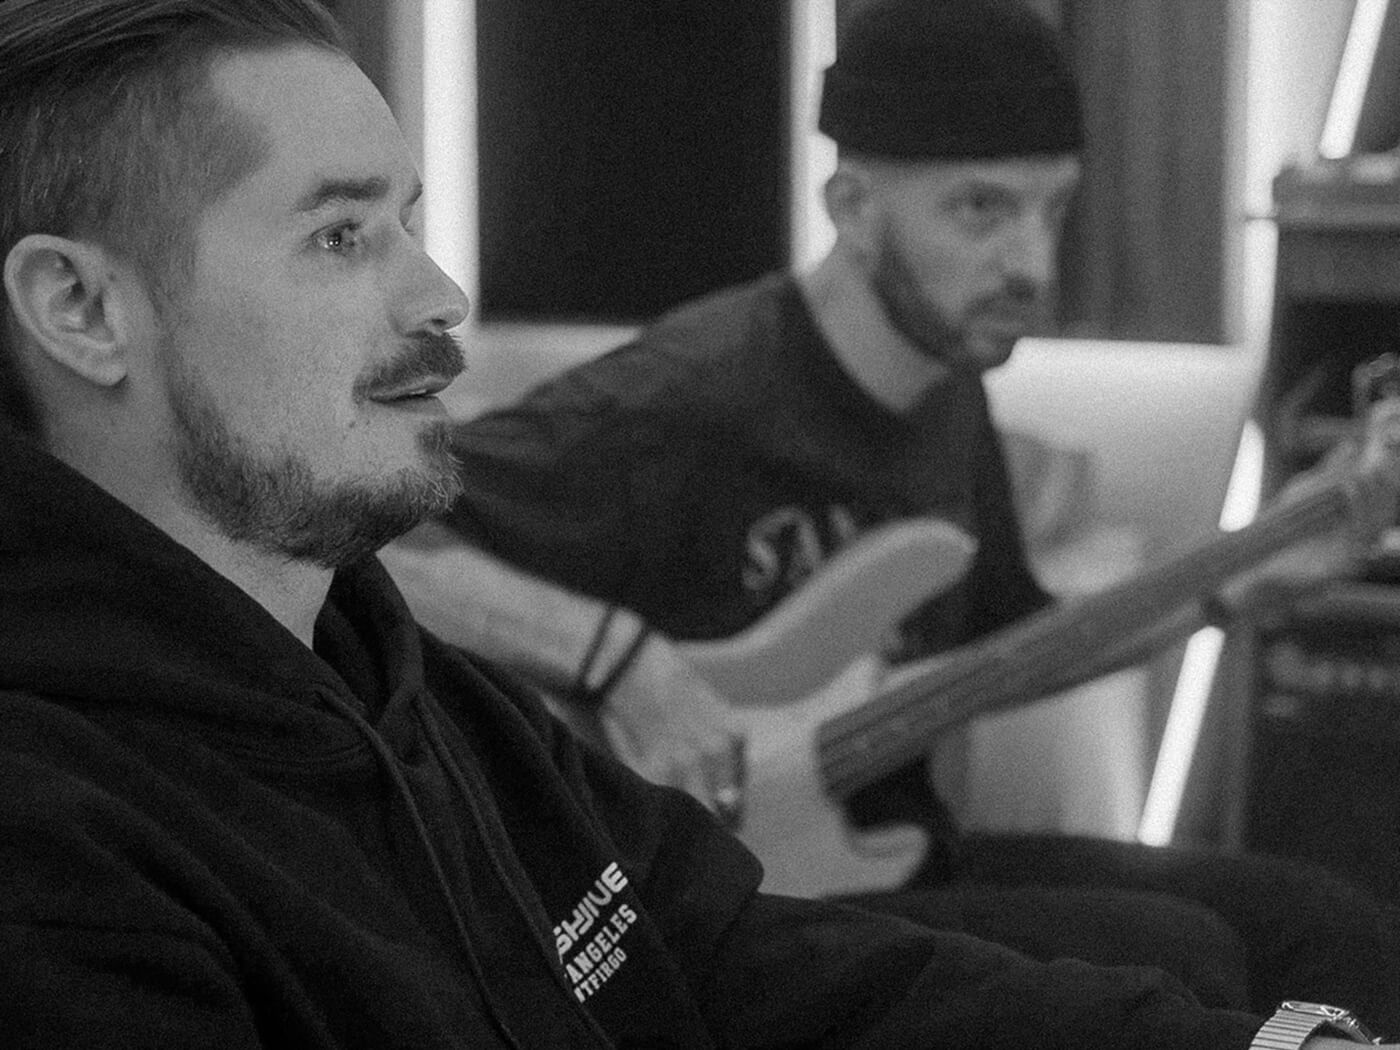 Charly Barranger (front) and Julien ‘PitchIn’ Corrales (back) of Dirtyphonics in the studio